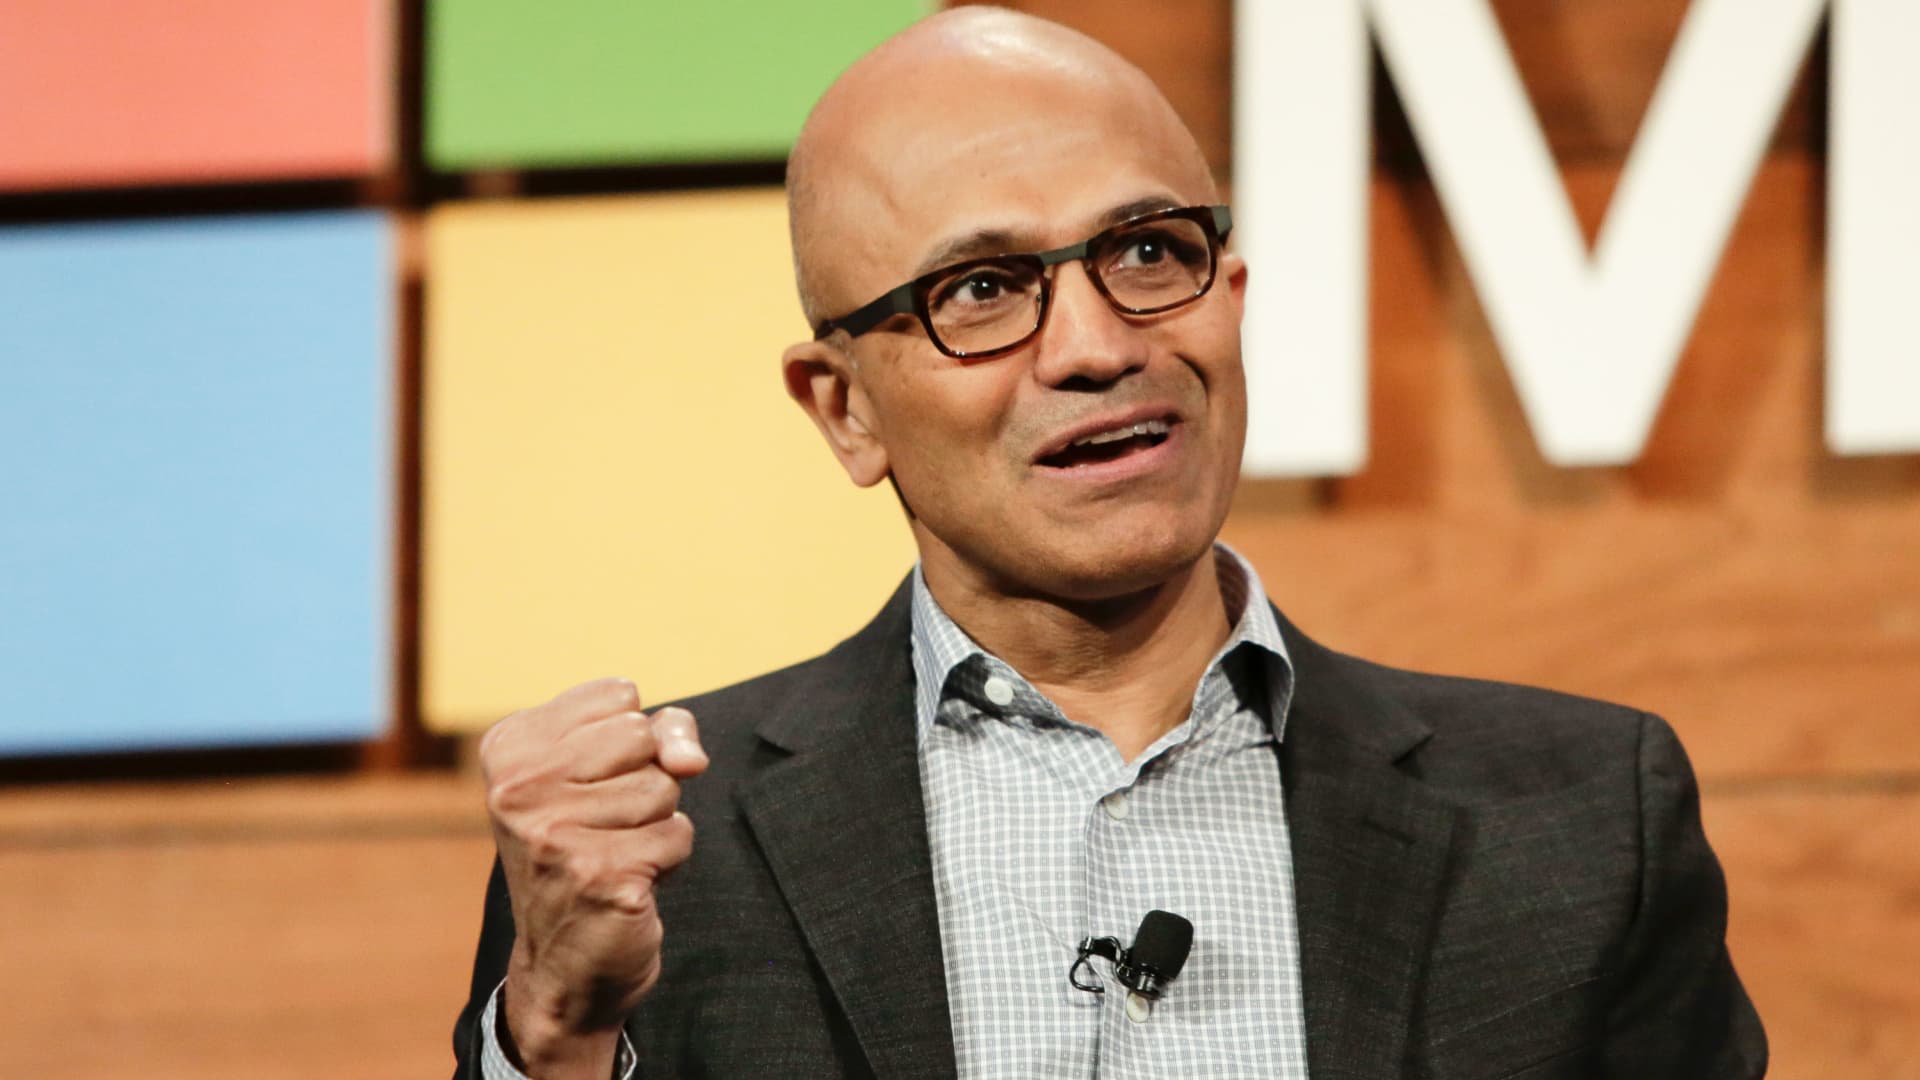 Microsoft stock up as Wall Street heralds strong earnings report